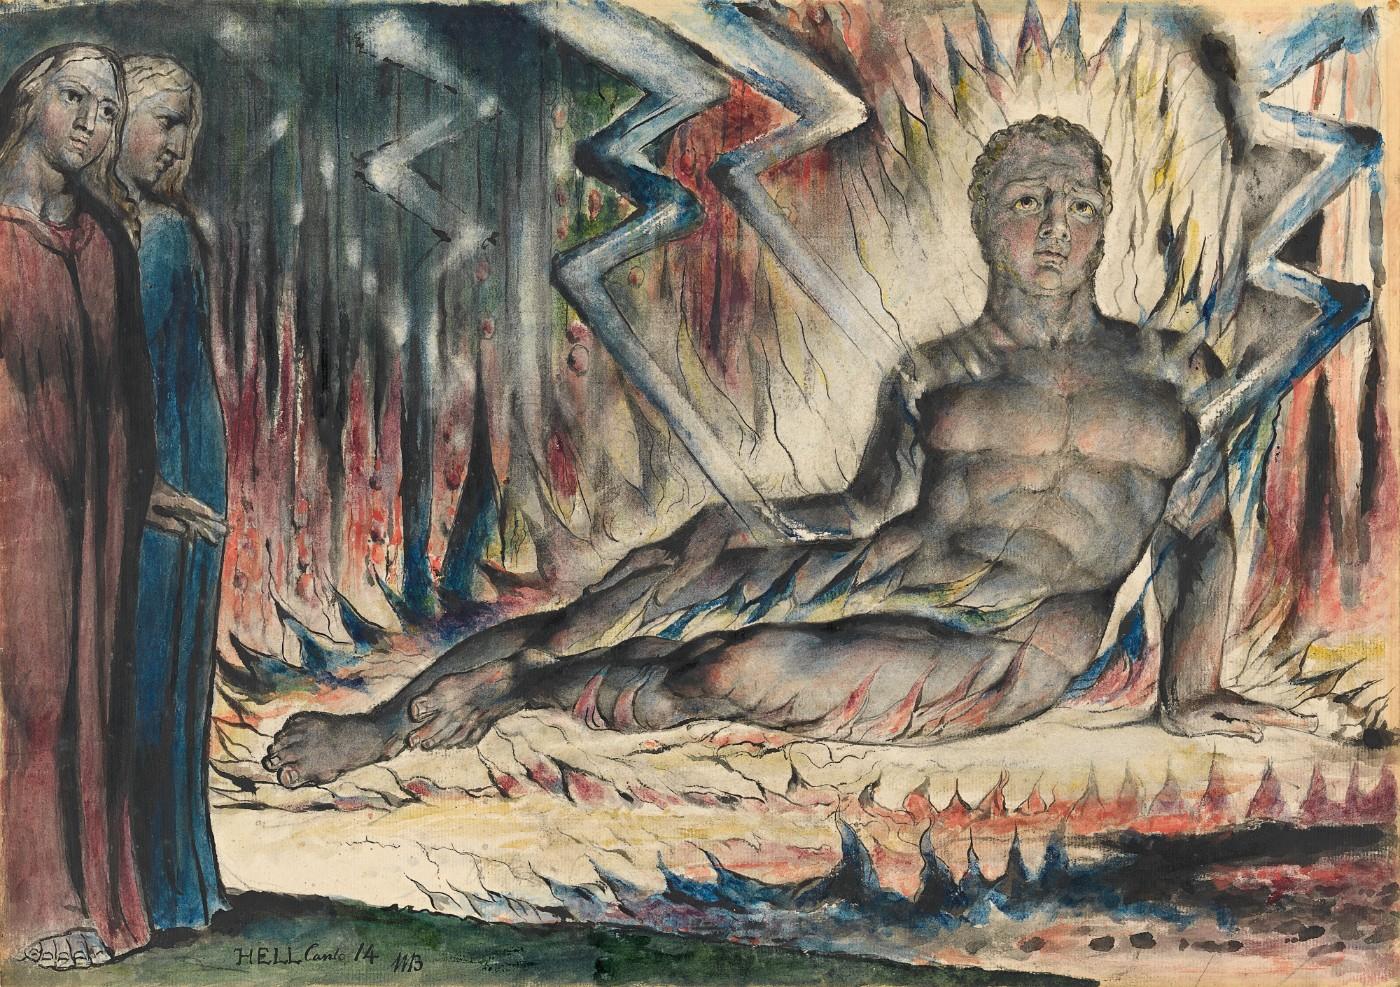 The Visionary Art of William Blake Art & Object